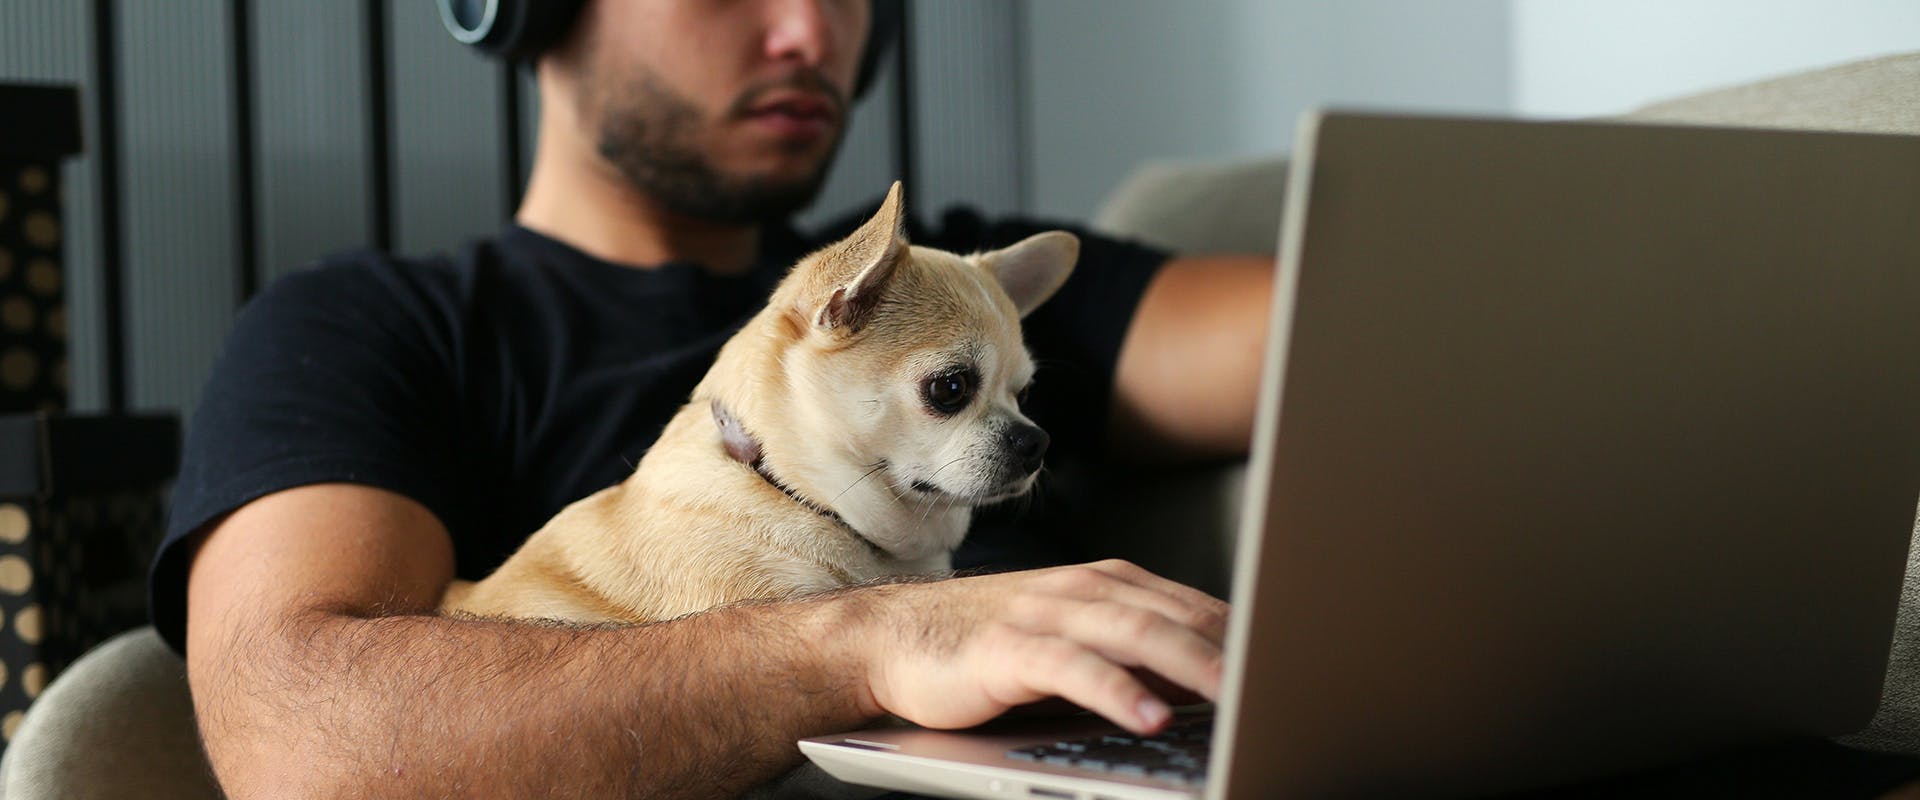 A man sitting on his laptop, a dog sat on his lap